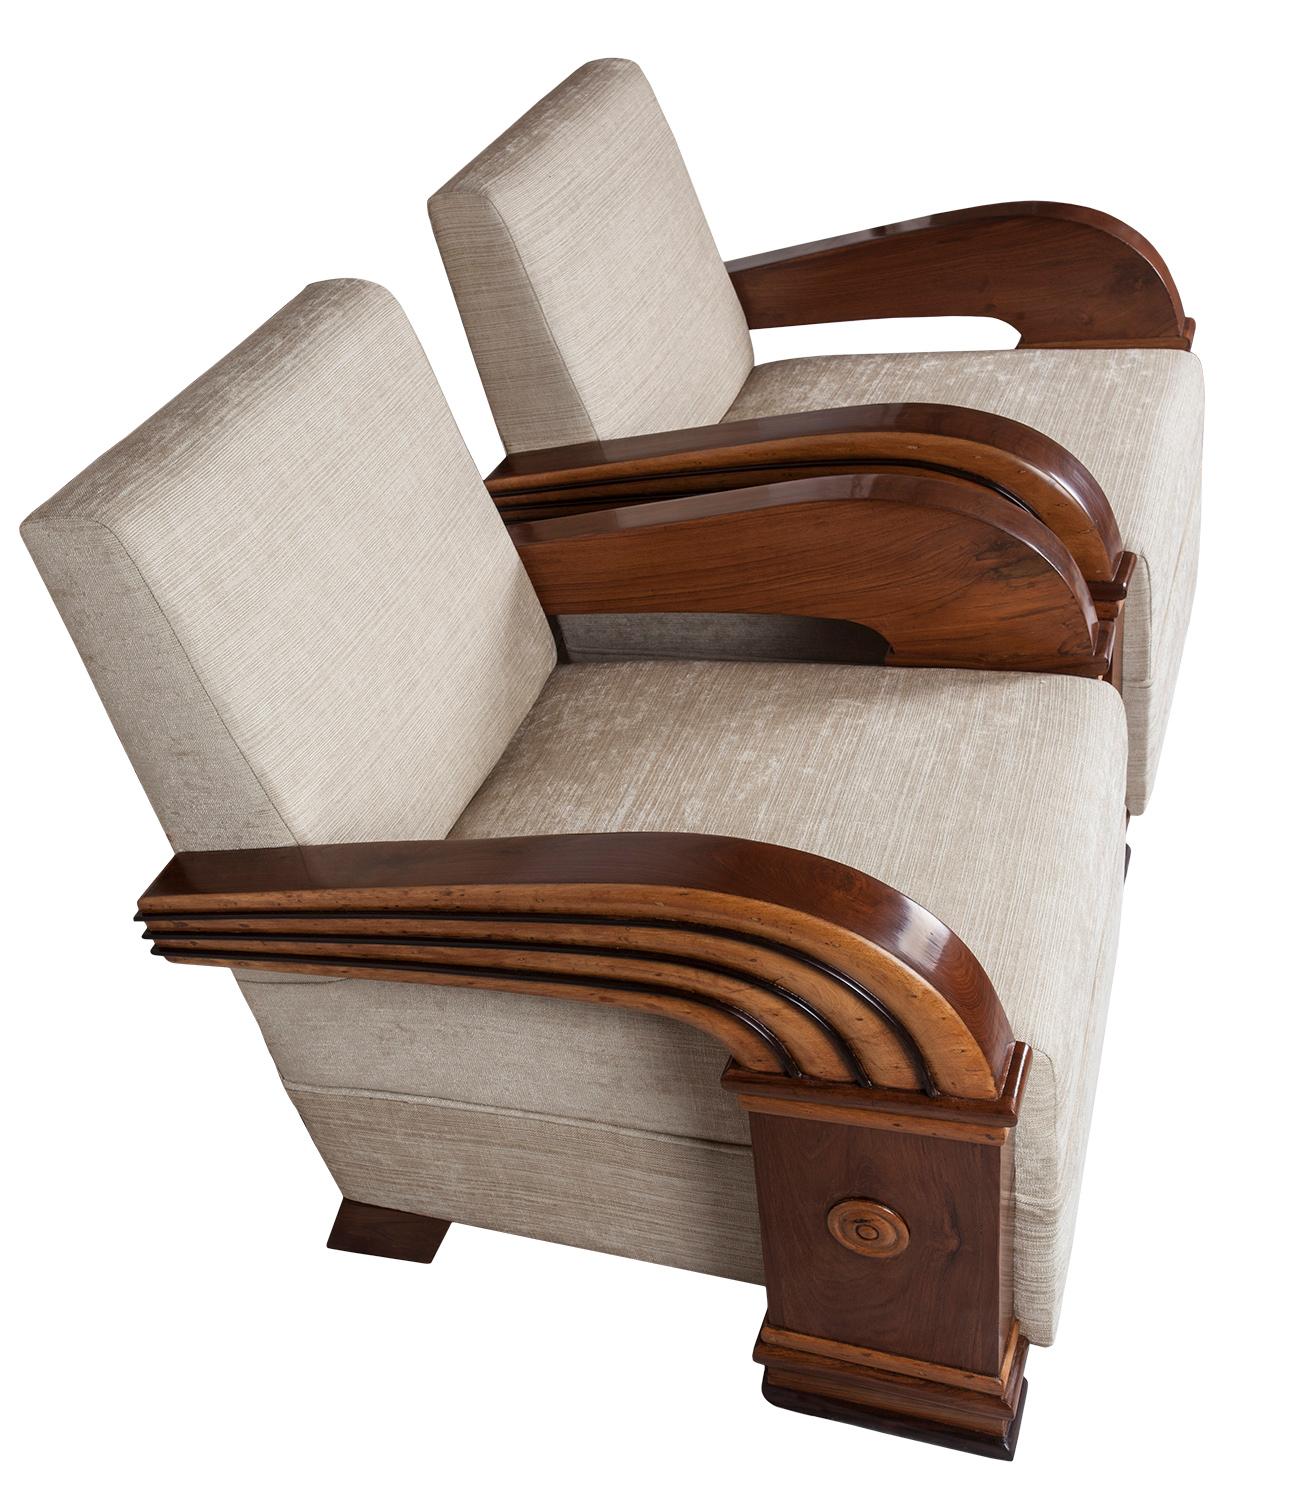 Pair of teak club chairs with rosewood accents in the art moderne streamlined style of the 1930s, epitomized in the sweep of the arms. European. Reupholstered with an off-white blend of silk and linen with two matching 16